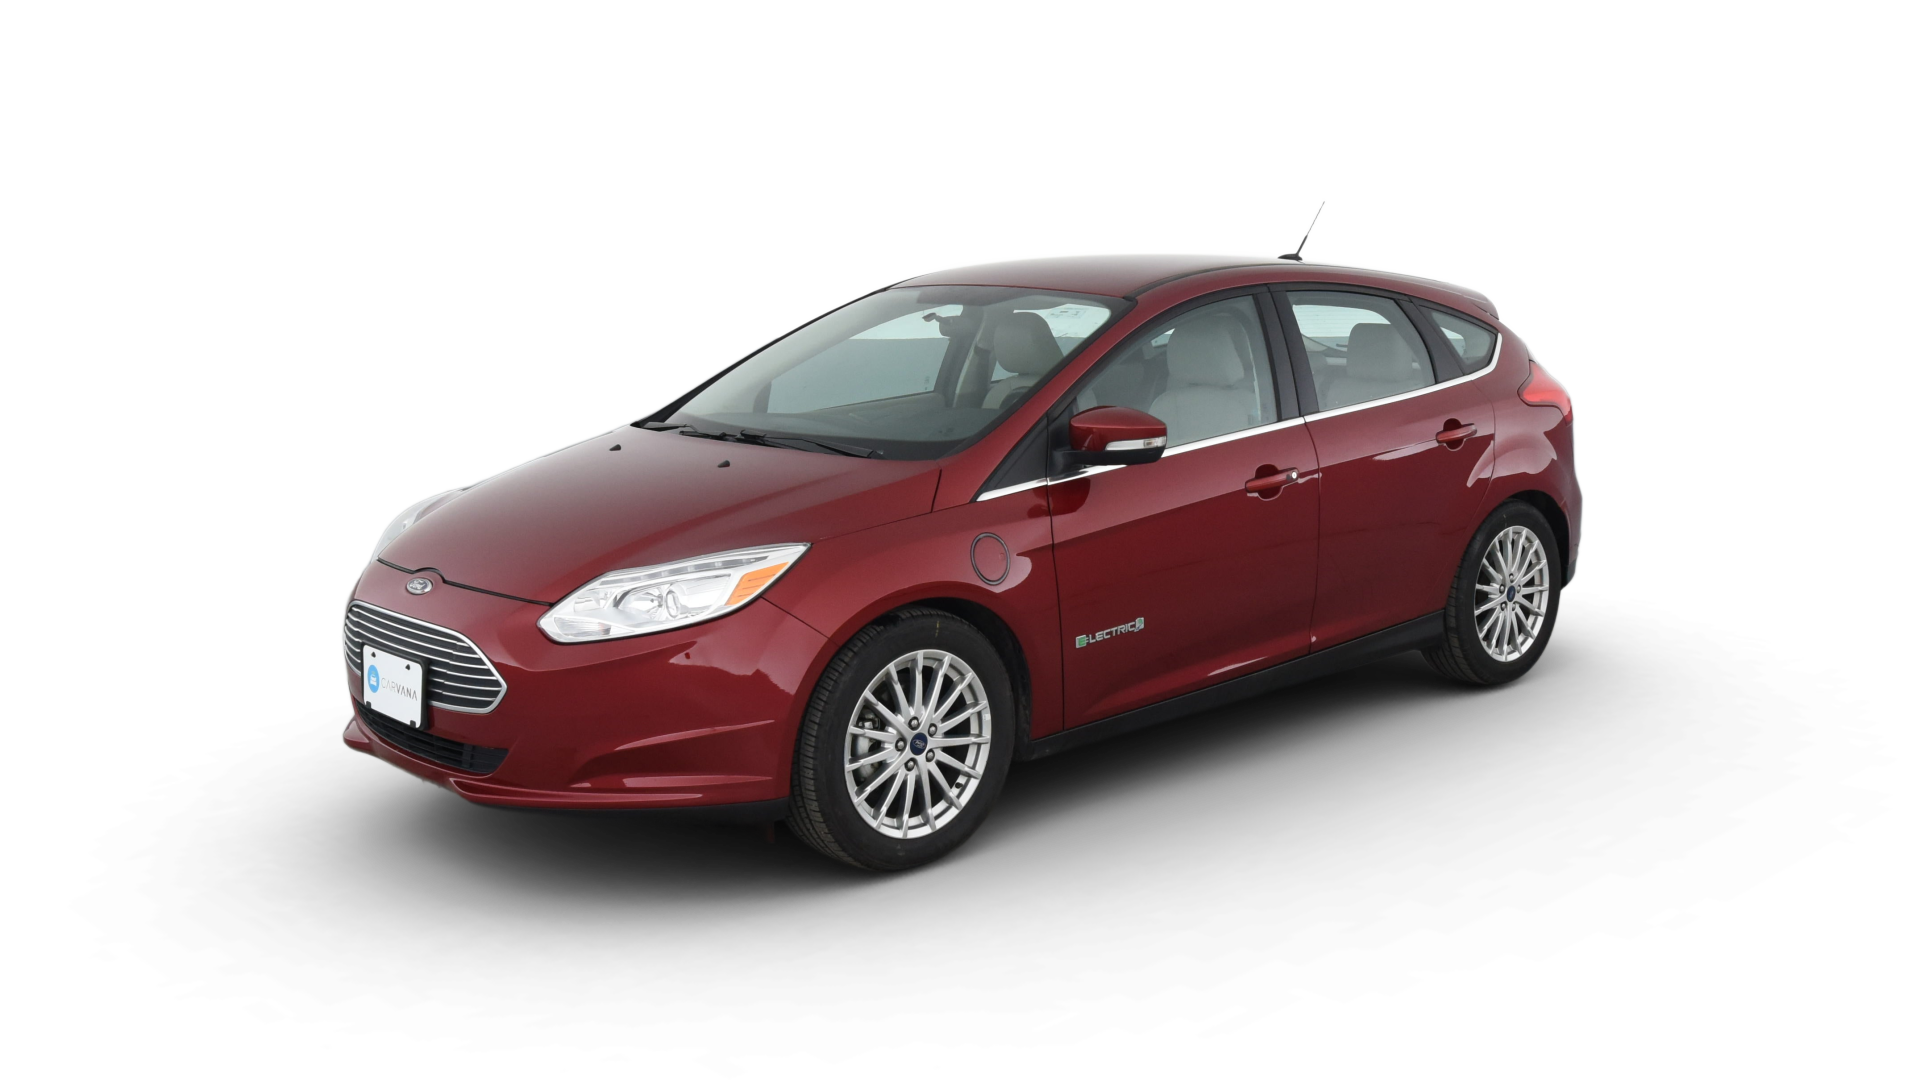 Used Ford Focus Electric for sale in Michigan City, IN | Carvana